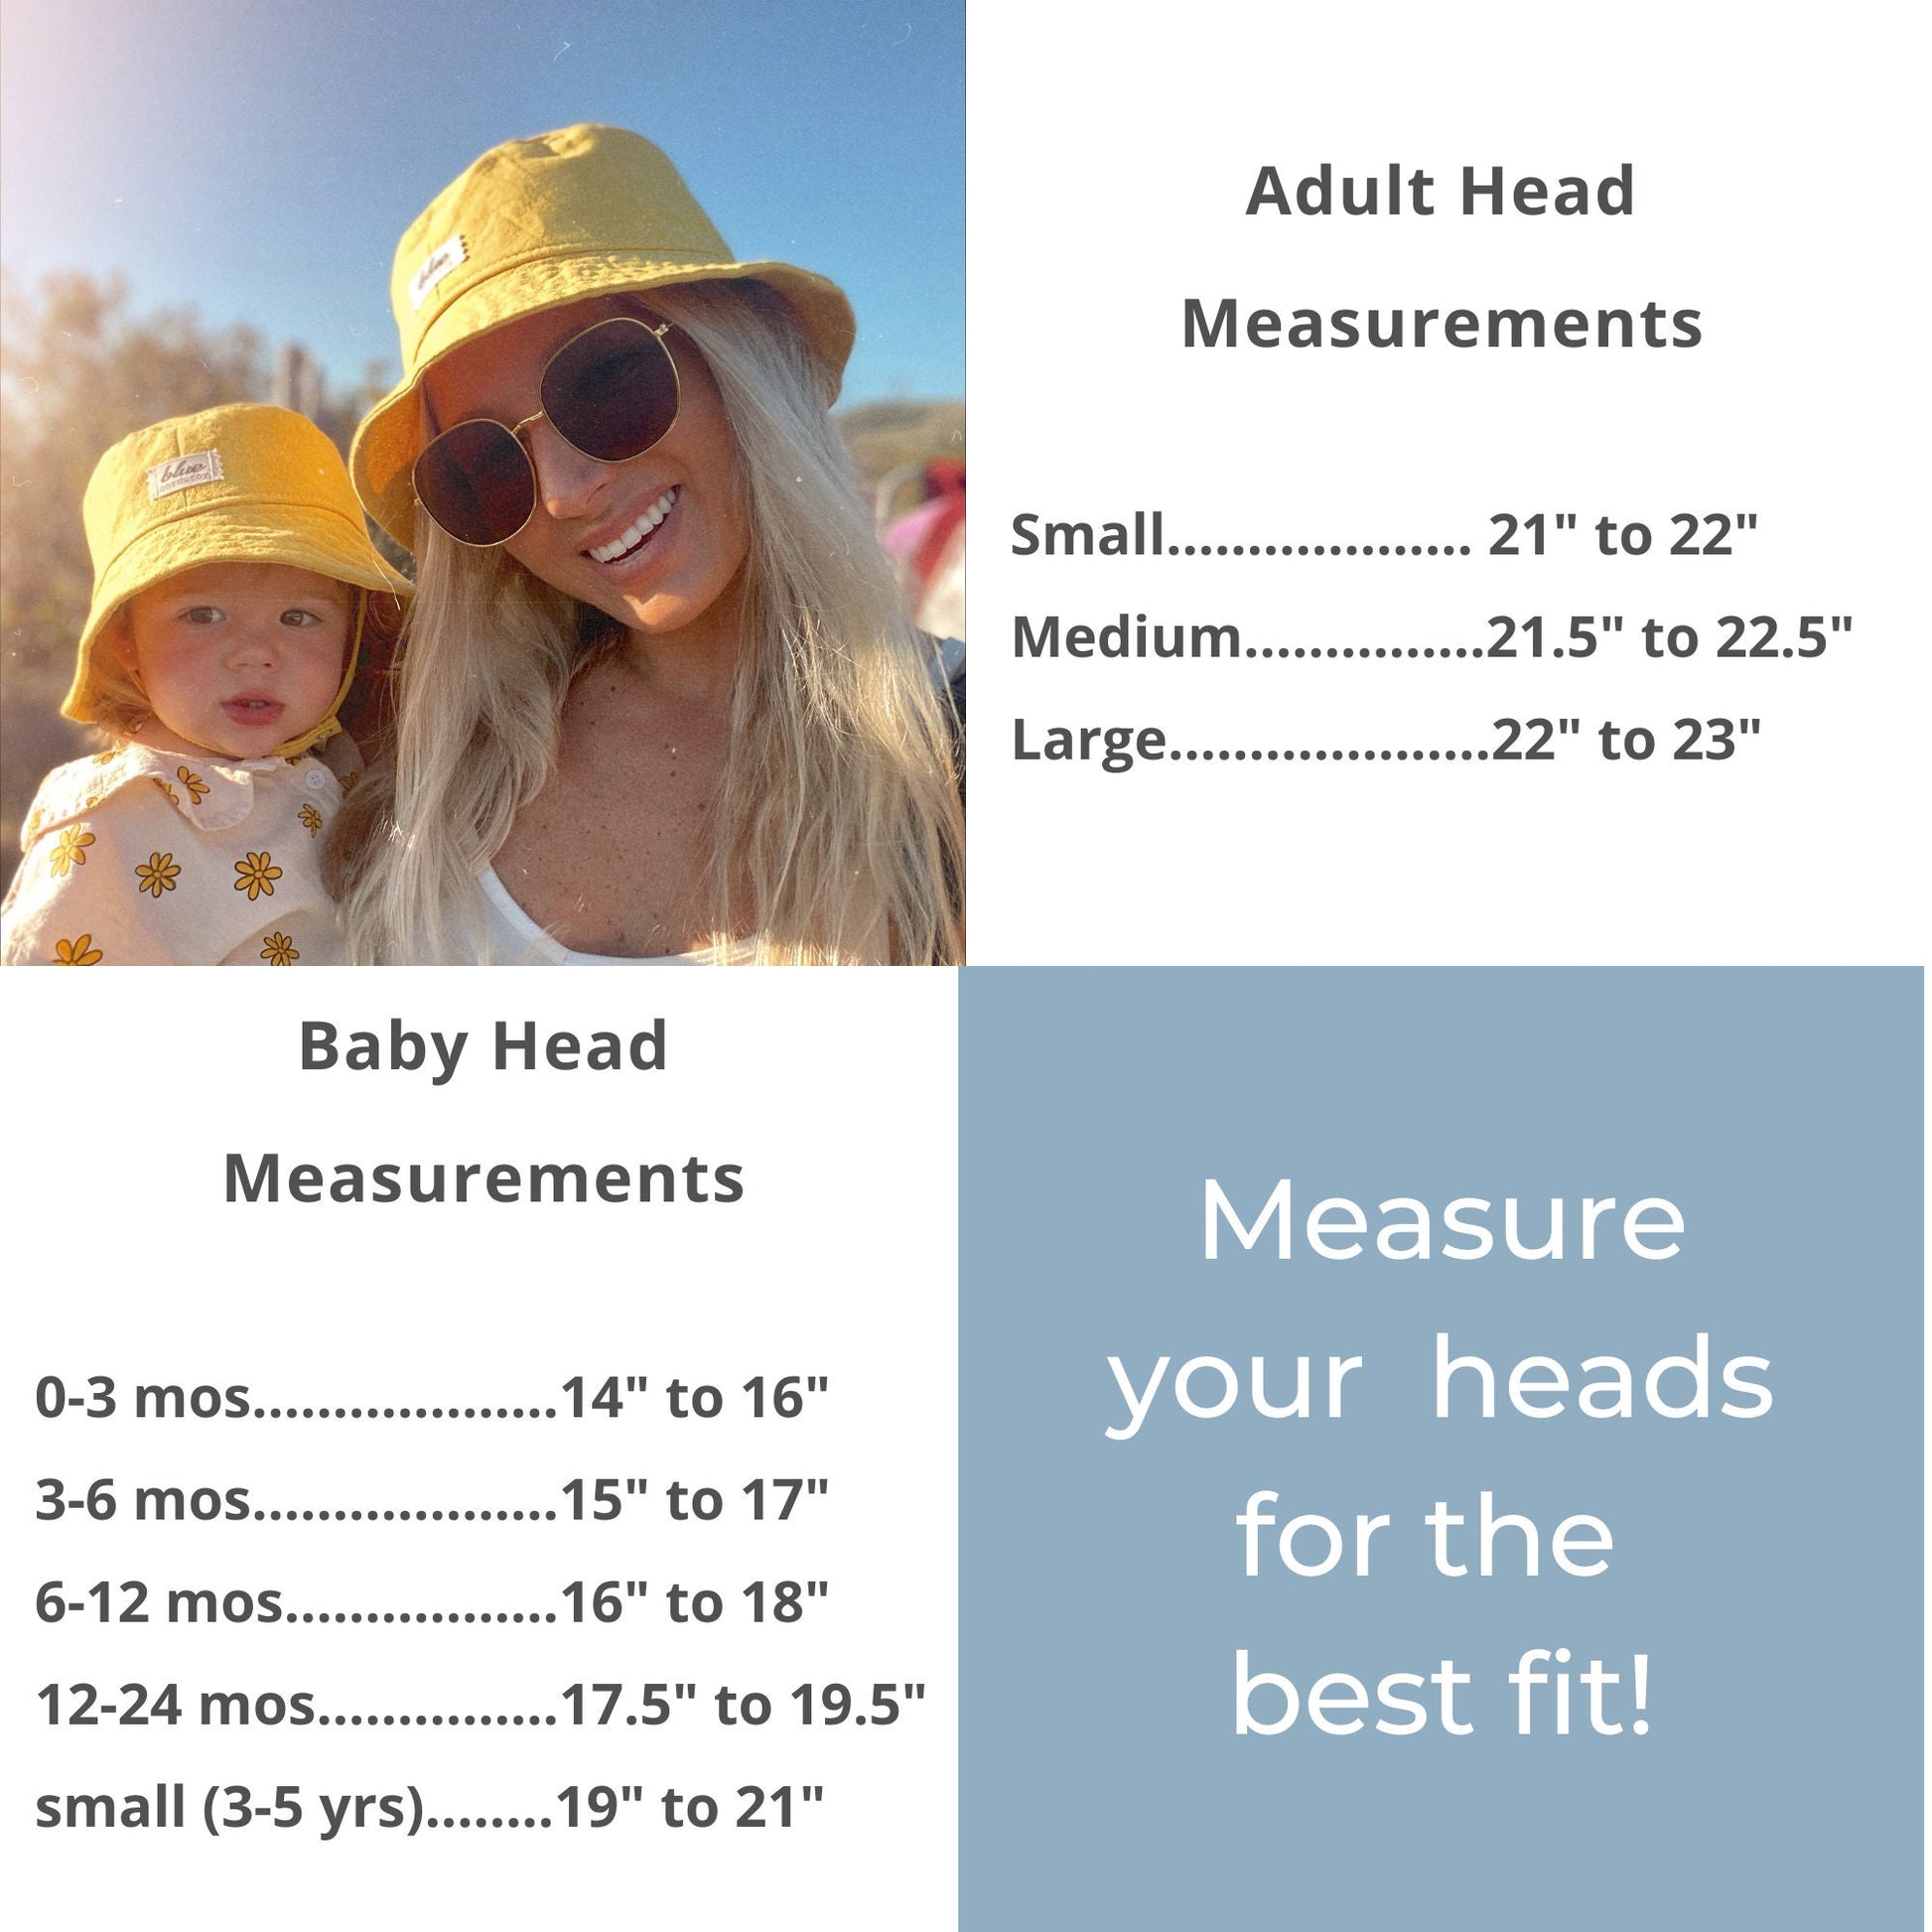 Matching Mommy and Baby Hats, Mama and Mini Hat Set, Yellow Sun Hat, Bucket Hat, Baby Beach Hat, Summer Newborn Gift, Linen Hat